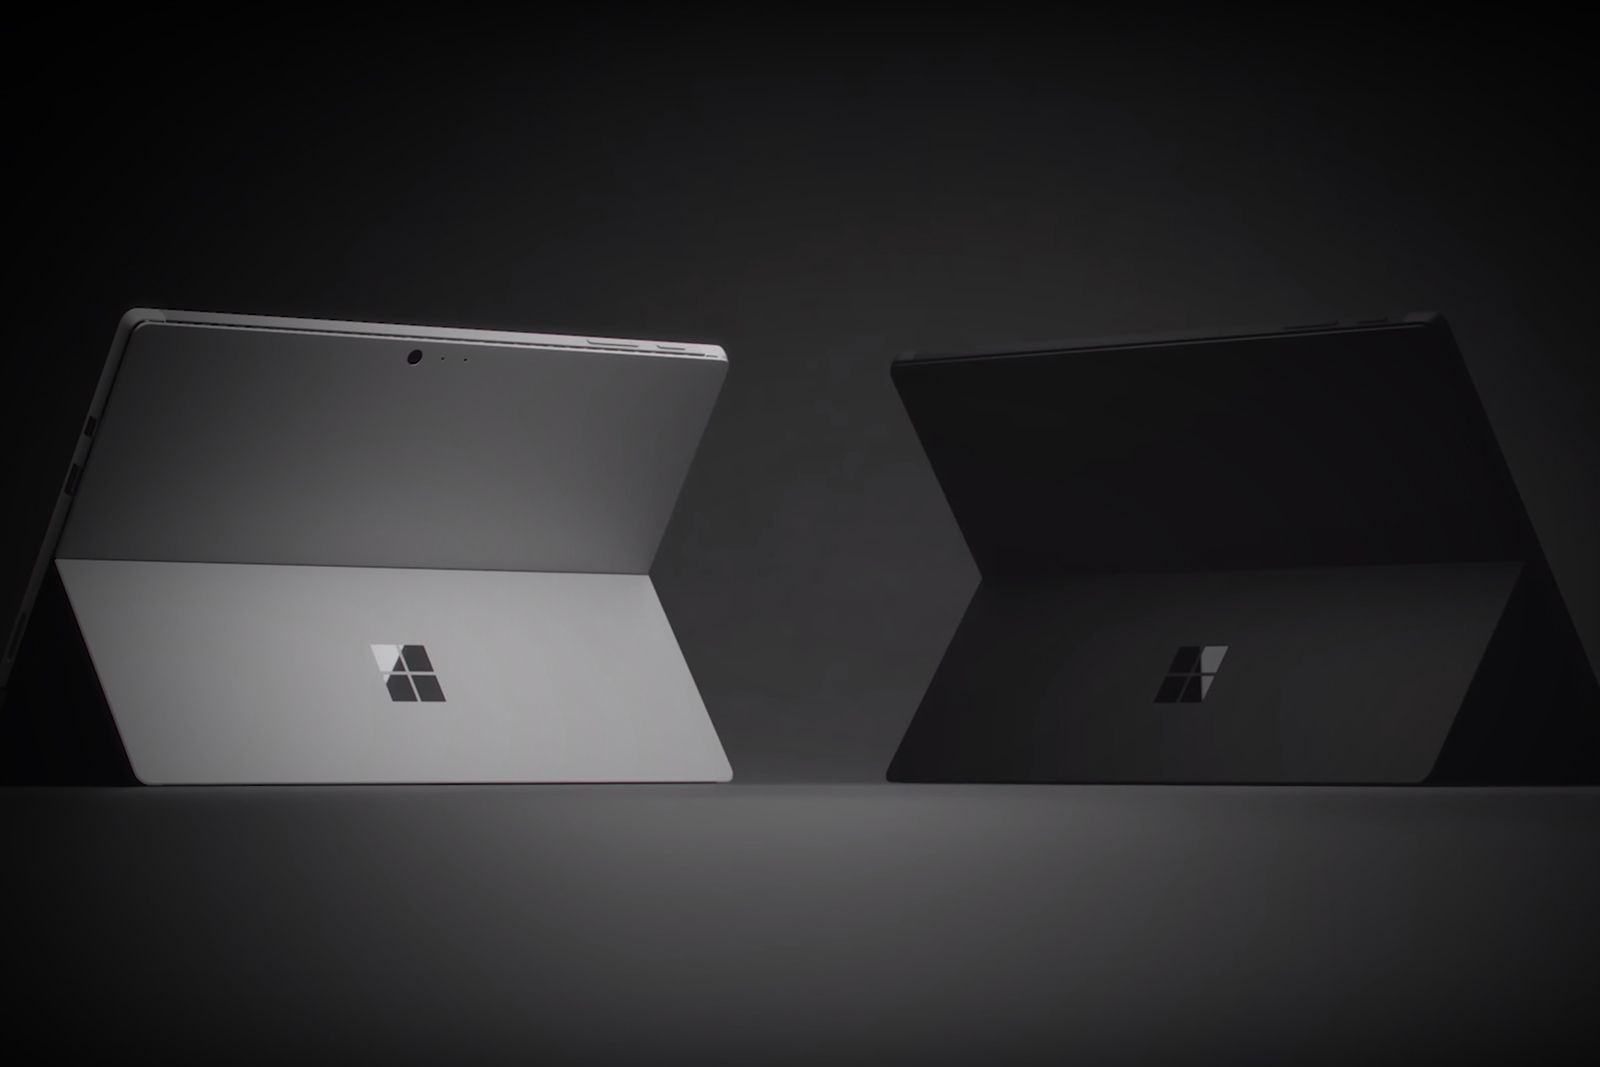 Microsoft announces Surface Pro 6 and Surface Laptop 2 in black image 1